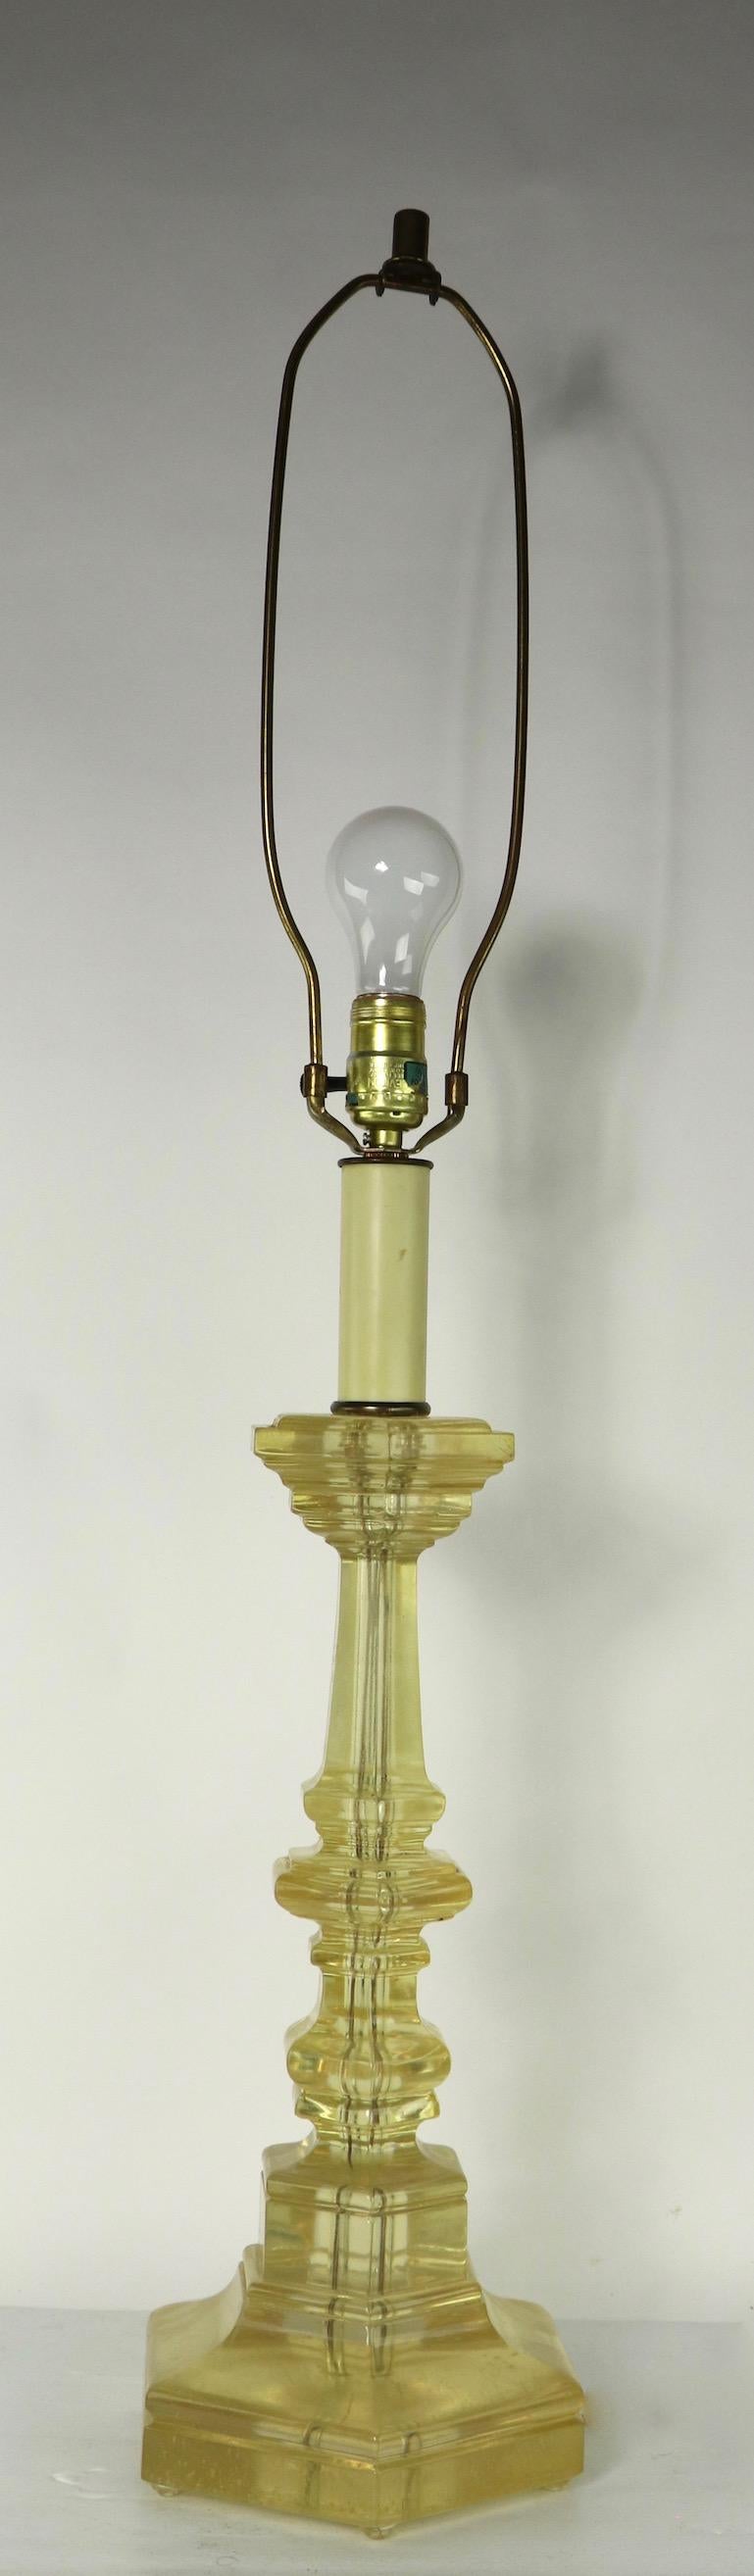 Chic and stylish table lamp in the form of a candlestick, in solid cast lucite. This example is in good originalm and working condition, it has a small impact bruise, and is missing one foot at the base, both condition issues are inconsequential and